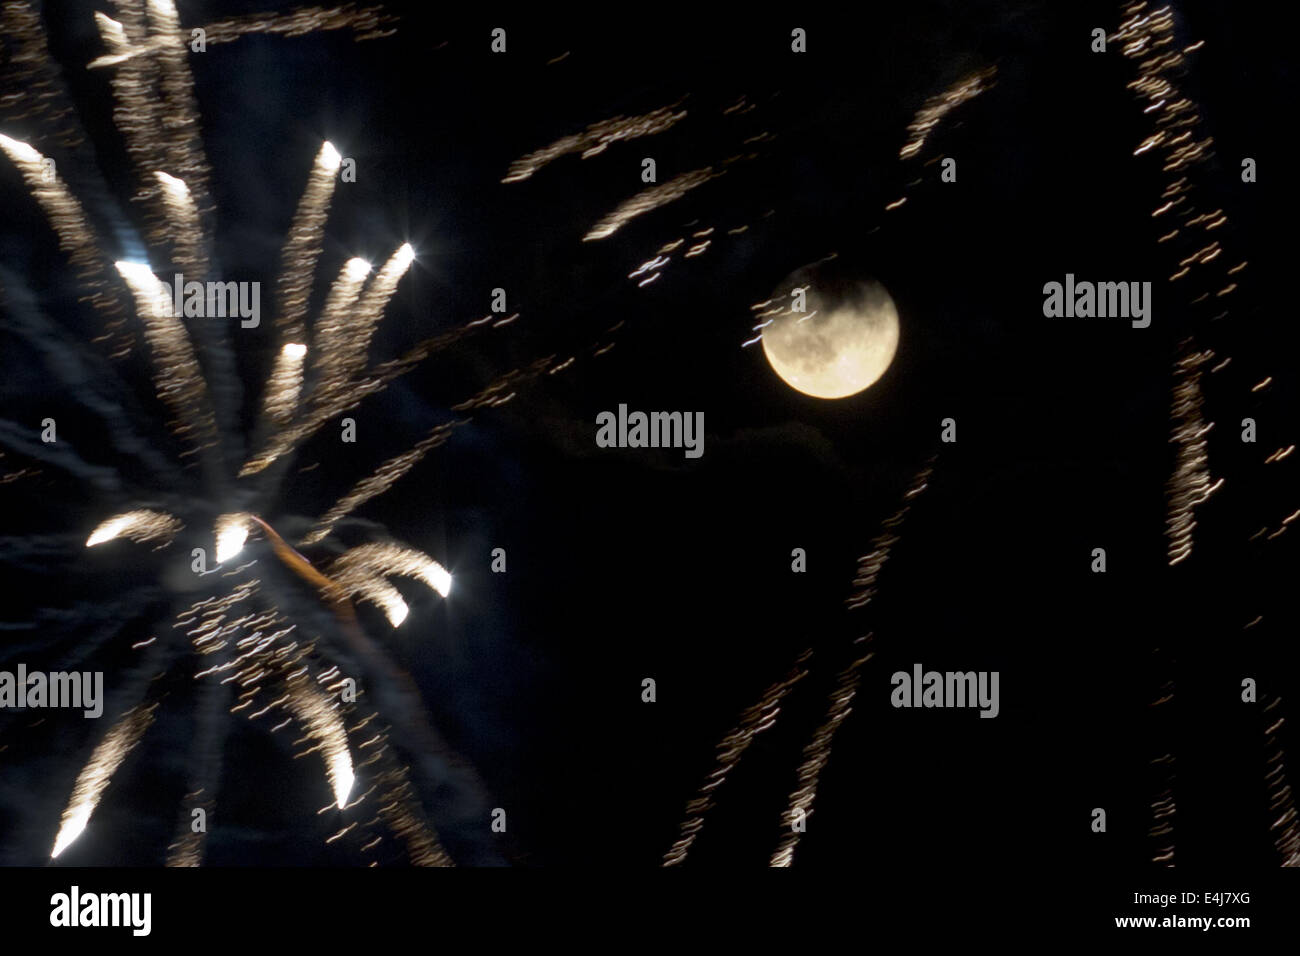 Chester, New York, USA. 12th July, 2014. A perigee full moon, also known as a supermoon, shares the sky with fireworks during a display in Chester, New York. The full moons of August and September will also be supermoons. Credit:  Tom Bushey/ZUMA Wire/Alamy Live News Stock Photo